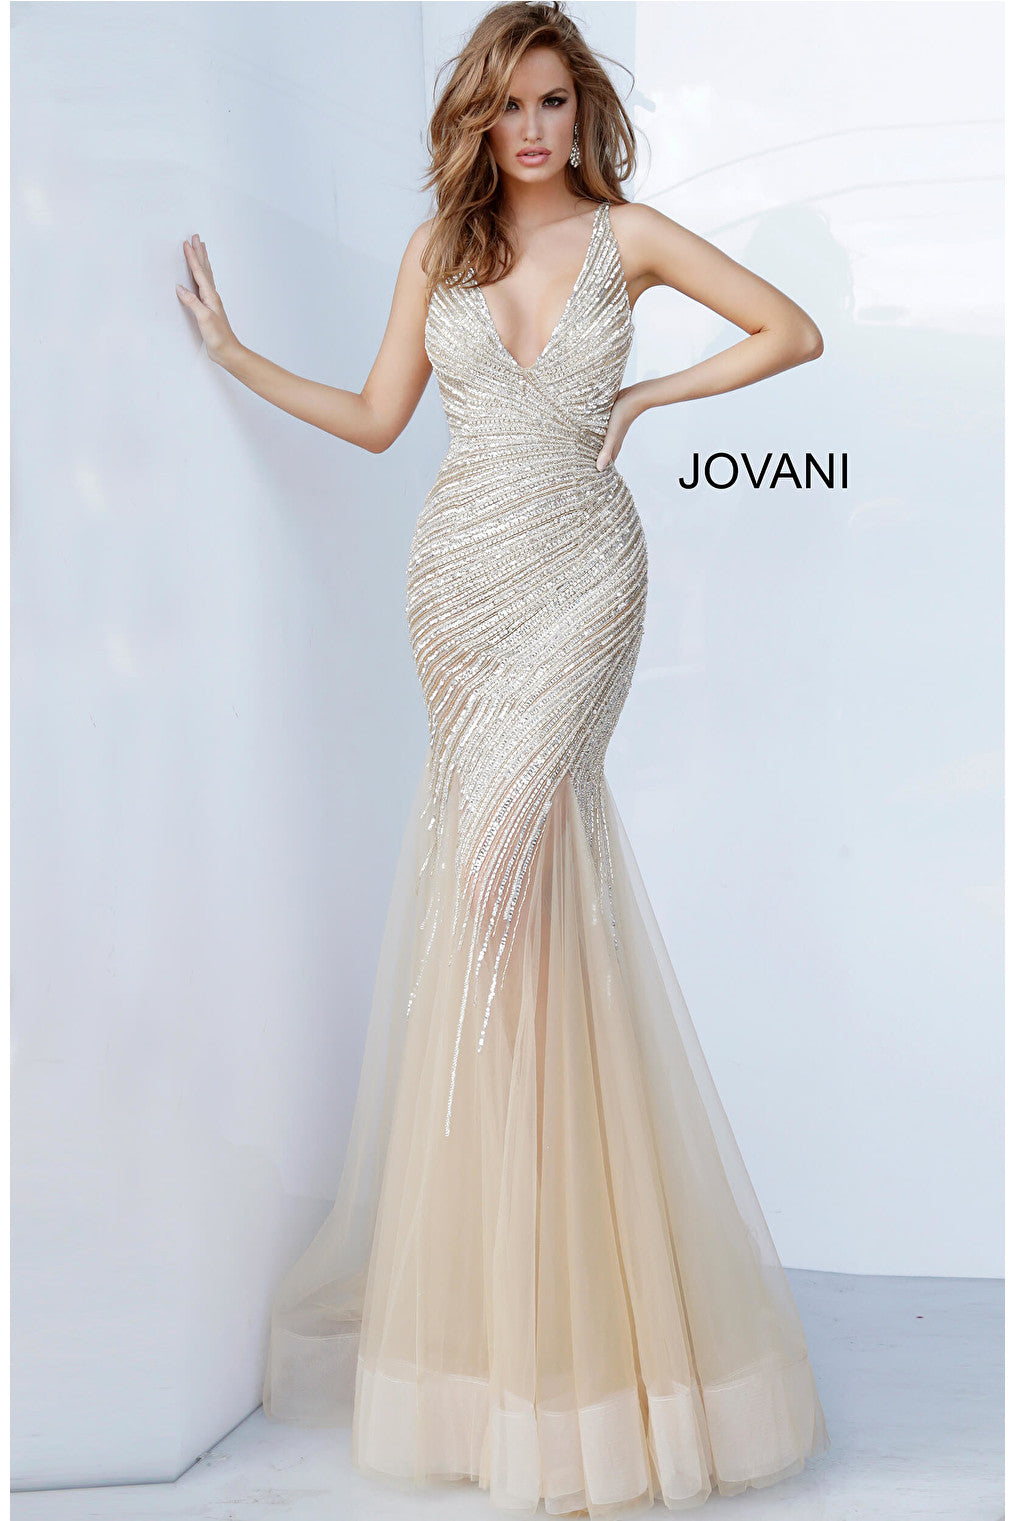 Jovani 32515 Mermaid Dress Long Prom Dress for $206.99 – The Dress Outlet